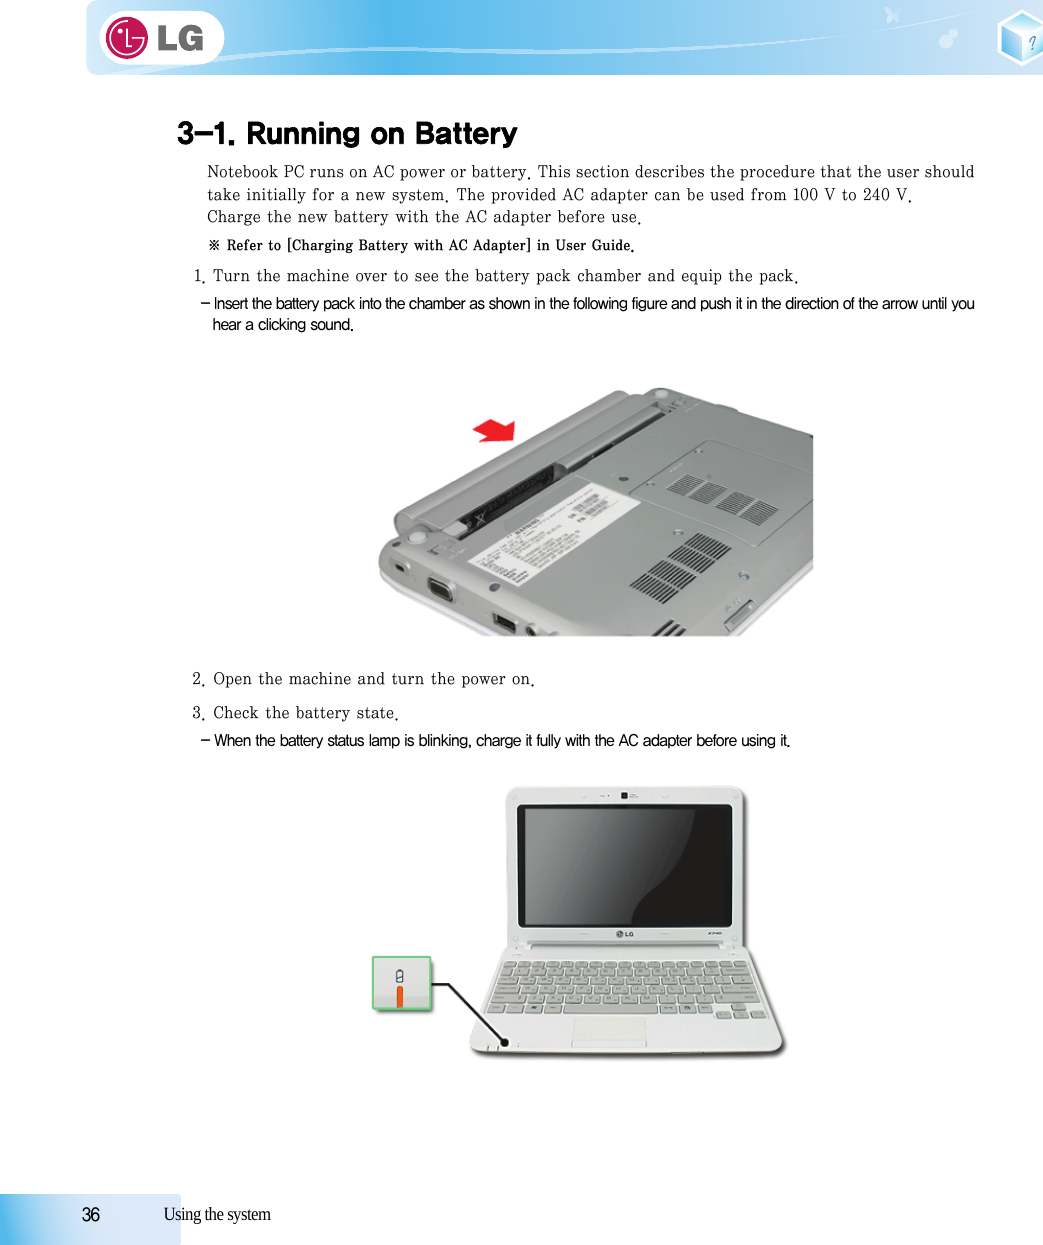 36            Using the system3-1. Running on BatteryNotebook PC runs on AC power or battery. This section describes the procedure that the user shouldtake initially for a new system. The provided AC adapter can be used from 100 V to 240 V.Charge the new battery with the AC adapter before use.※ Refer to [Charging Battery with AC Adapter] in User Guide.1. Turn the machine over to see the battery pack chamber and equip the pack.- Insert the battery pack into the chamber as shown in the following figure and push it in the direction of the arrow until youhear a clicking sound.2. Open the machine and turn the power on.3. Check the battery state.- When the battery status lamp is blinking, charge it fully with the AC adapter before using it.